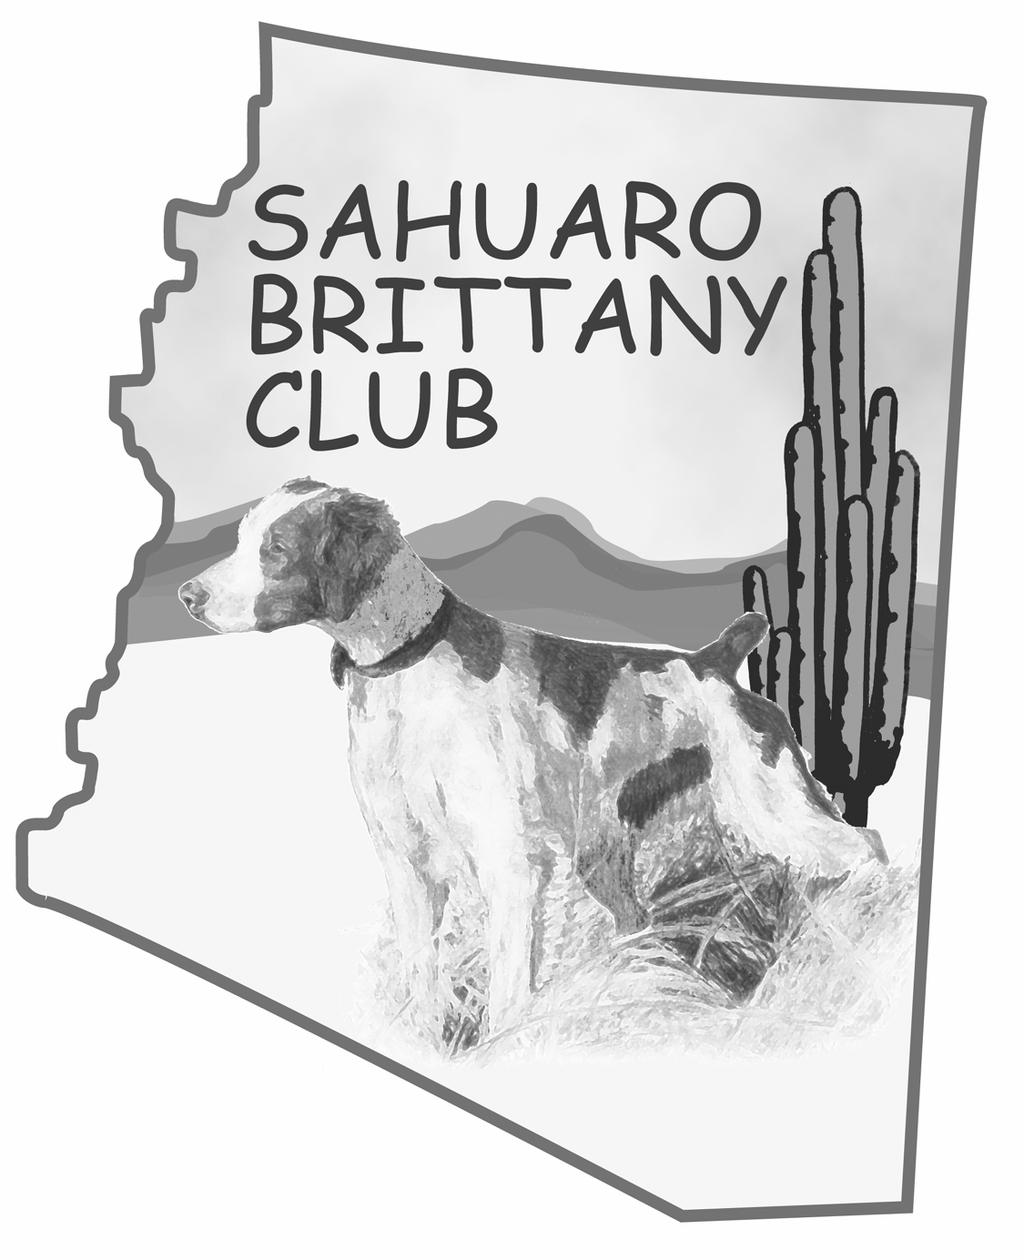 Sahuaro Brittany Club members would love to have you attend our first independent specialty show in conjunction with the Heart of the Desert Classic!